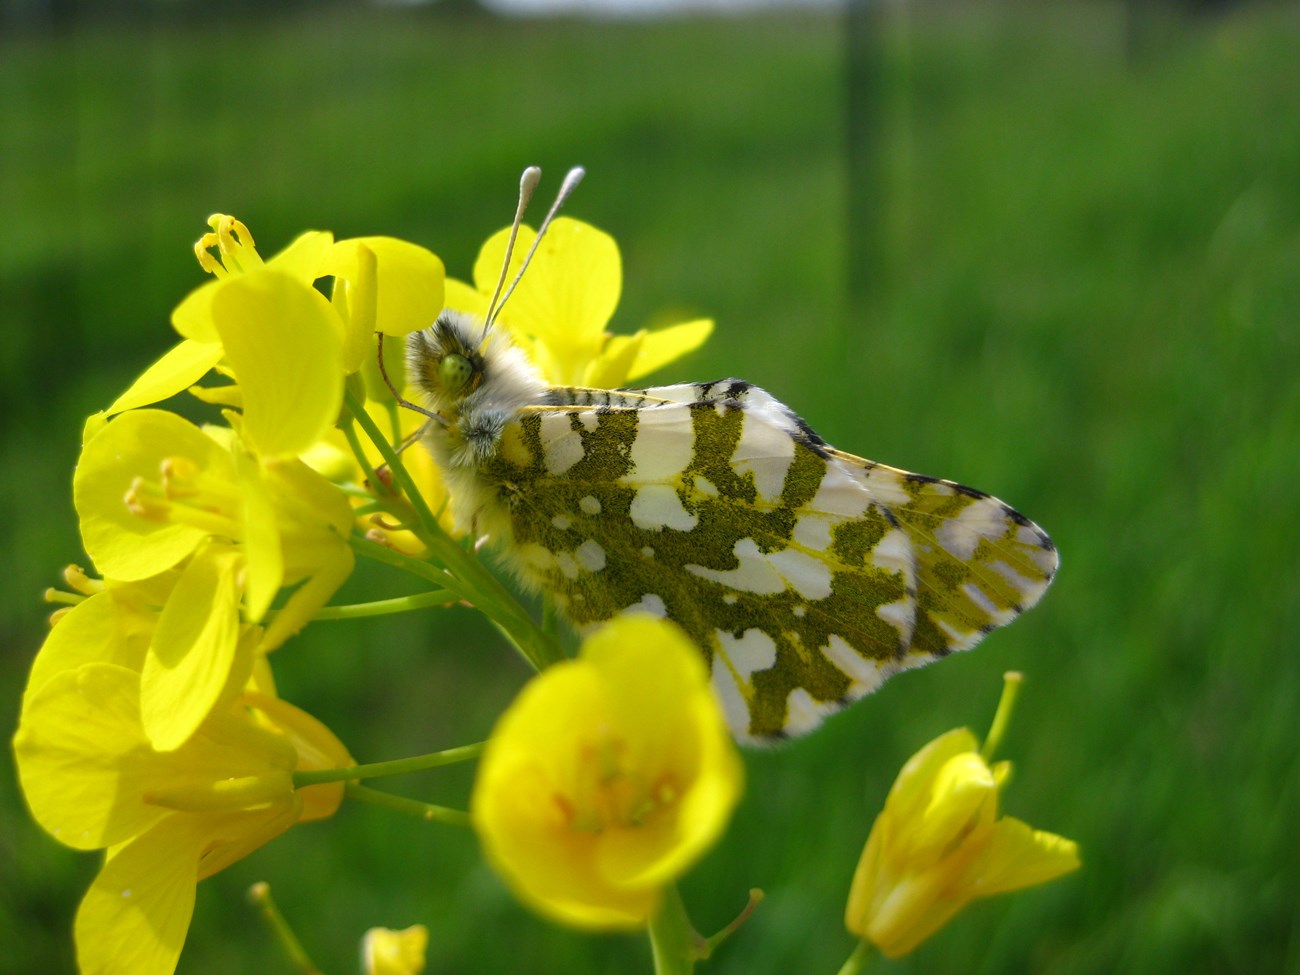 A green and white Island Marble Butterfly resting on a yellow mustard plant.